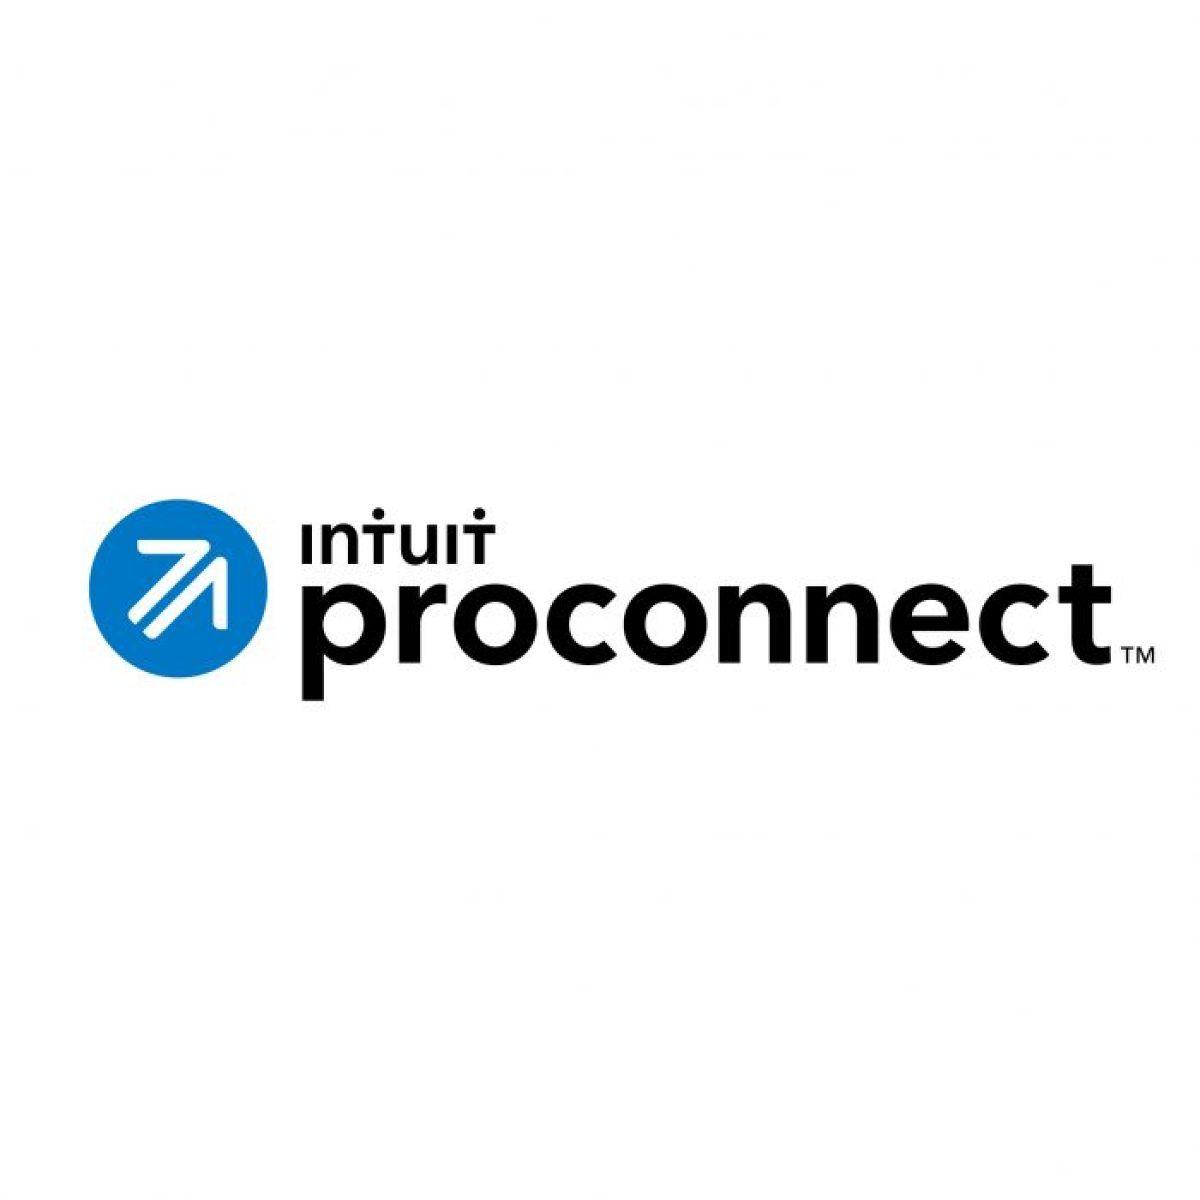 Intuit.com Logo - ProConnect: What Our New Name Means to Us and For You | Tax Pro ...